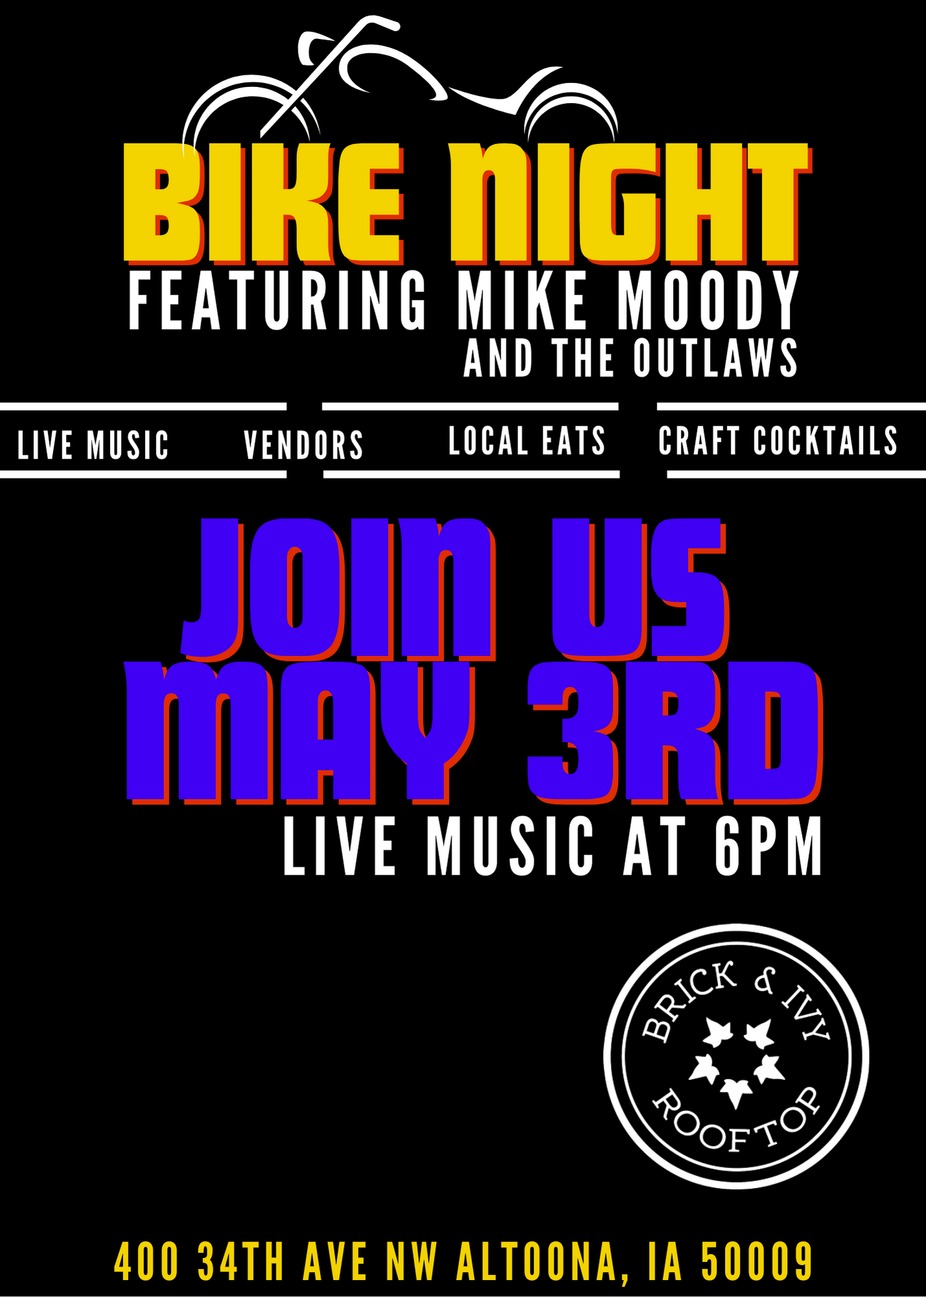 BIKE NIGHT featuring Mike Moody and the Outlaws event photo